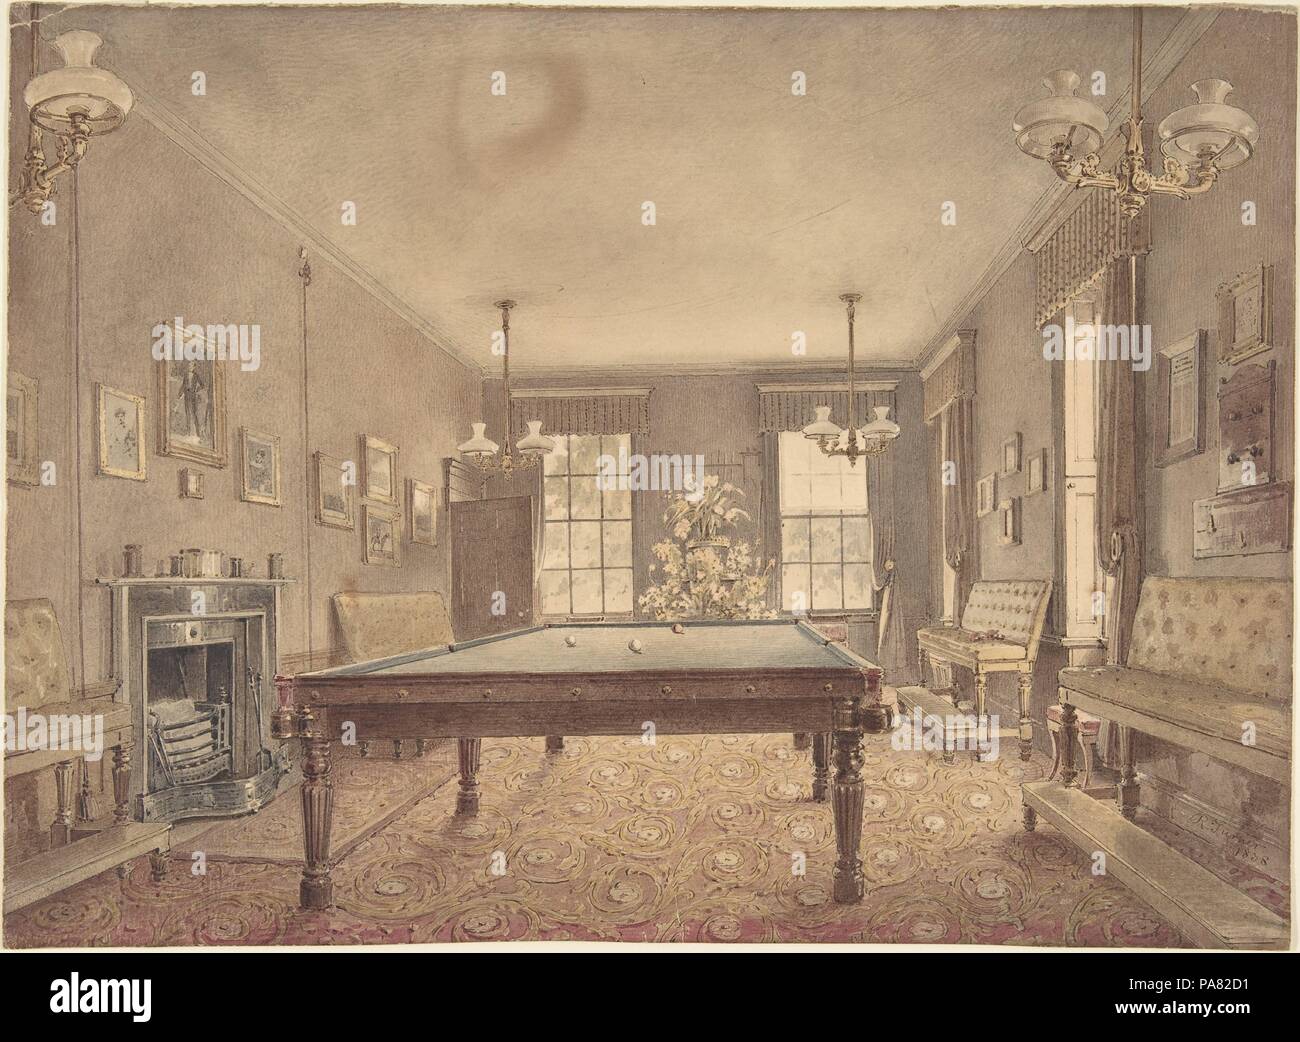 Interior of the billiard room at Lupton House, Devonshire, designed by George Wrightwick for Sir J.B.Y. Buller. Artist: Reid Turner (British, 1838-1896). Dimensions: sheet: 10 x 13 3/4 in. (25.4 x 34.9 cm). Date: 1838. Museum: Metropolitan Museum of Art, New York, USA. Stock Photo